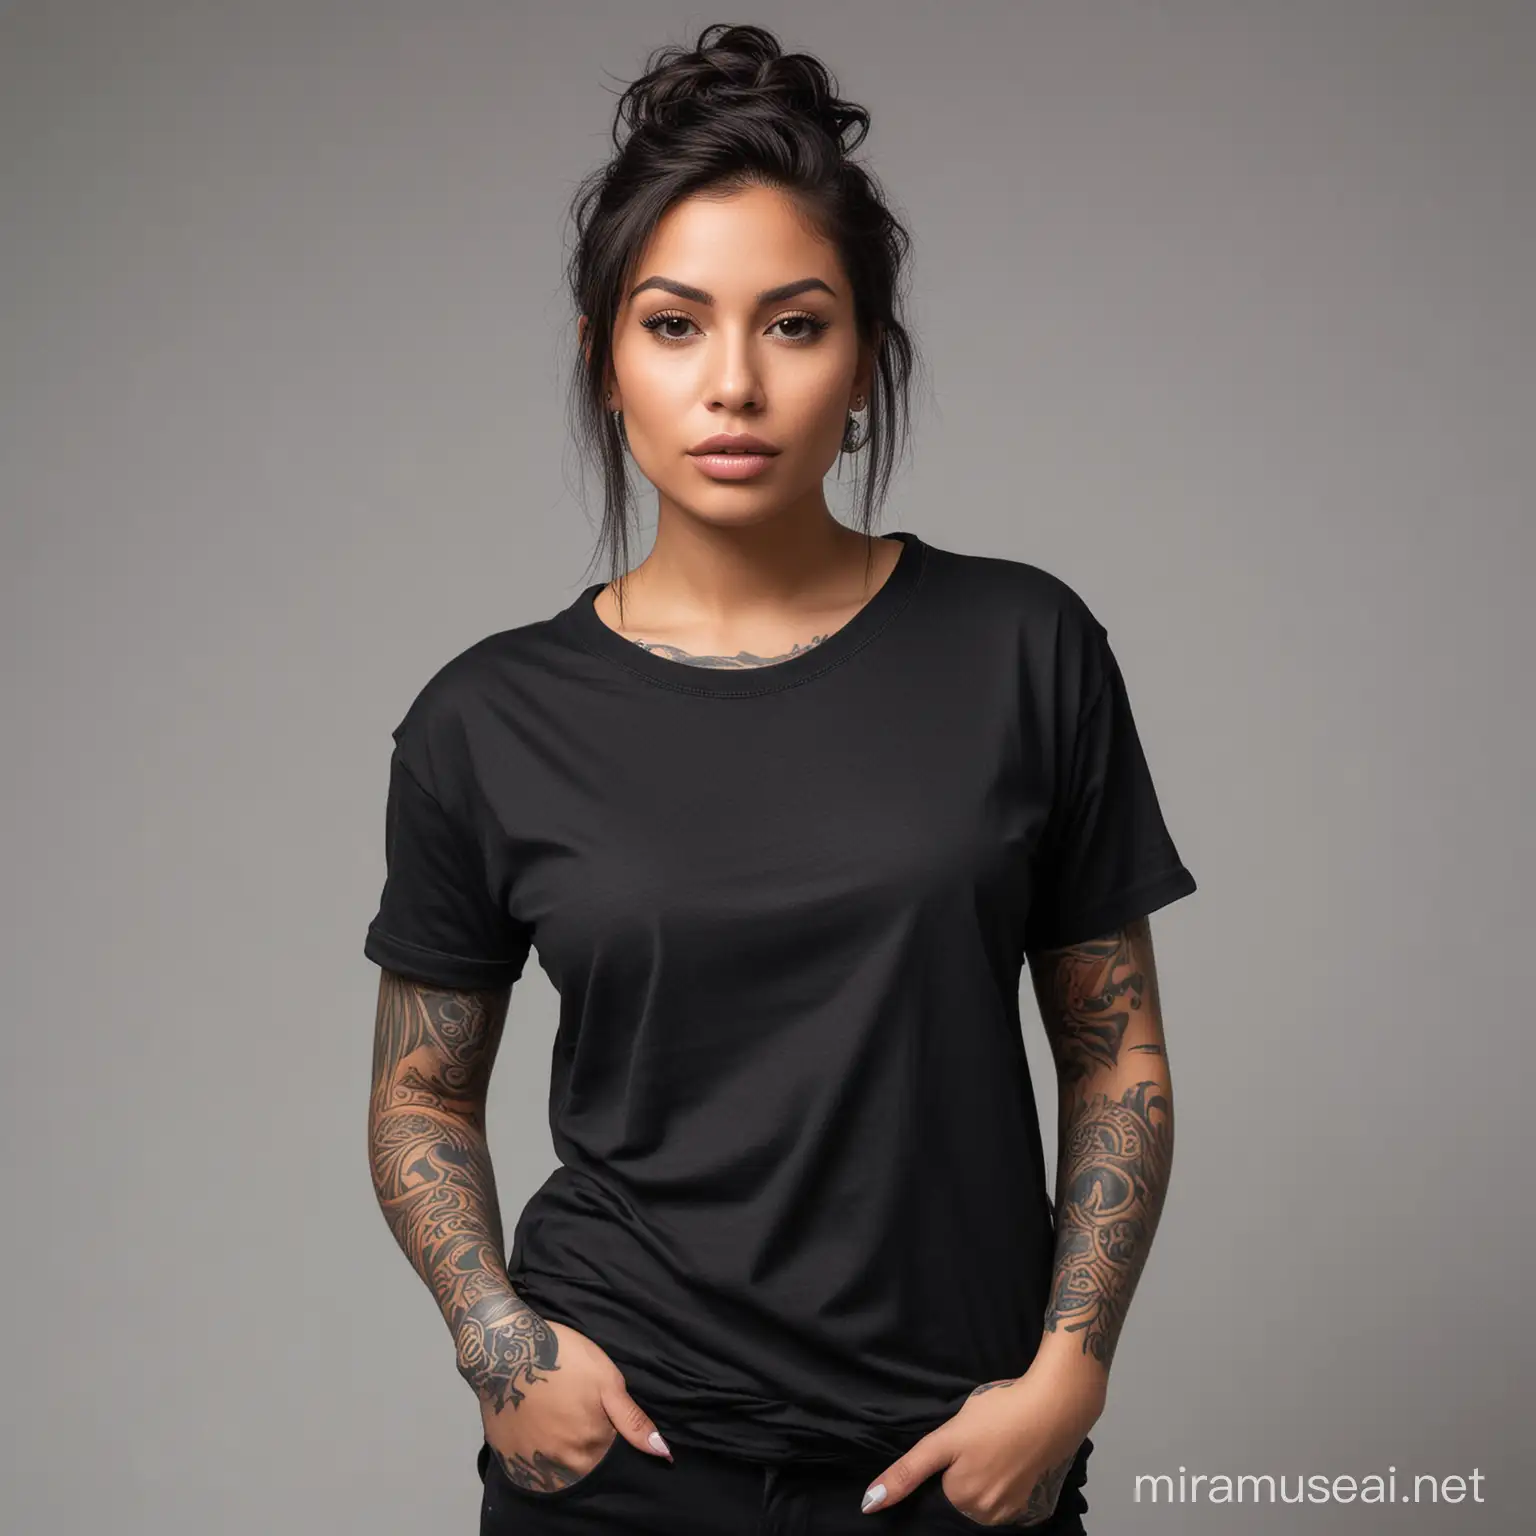 Produce a highly professional and realistic image featuring a beautiful, tattooed Latina model wearing an oversized blank black t-shirt. The photo should showcase a clear, full view of the t-shirt against a white background, emphasizing a clean and minimalist aesthetic.